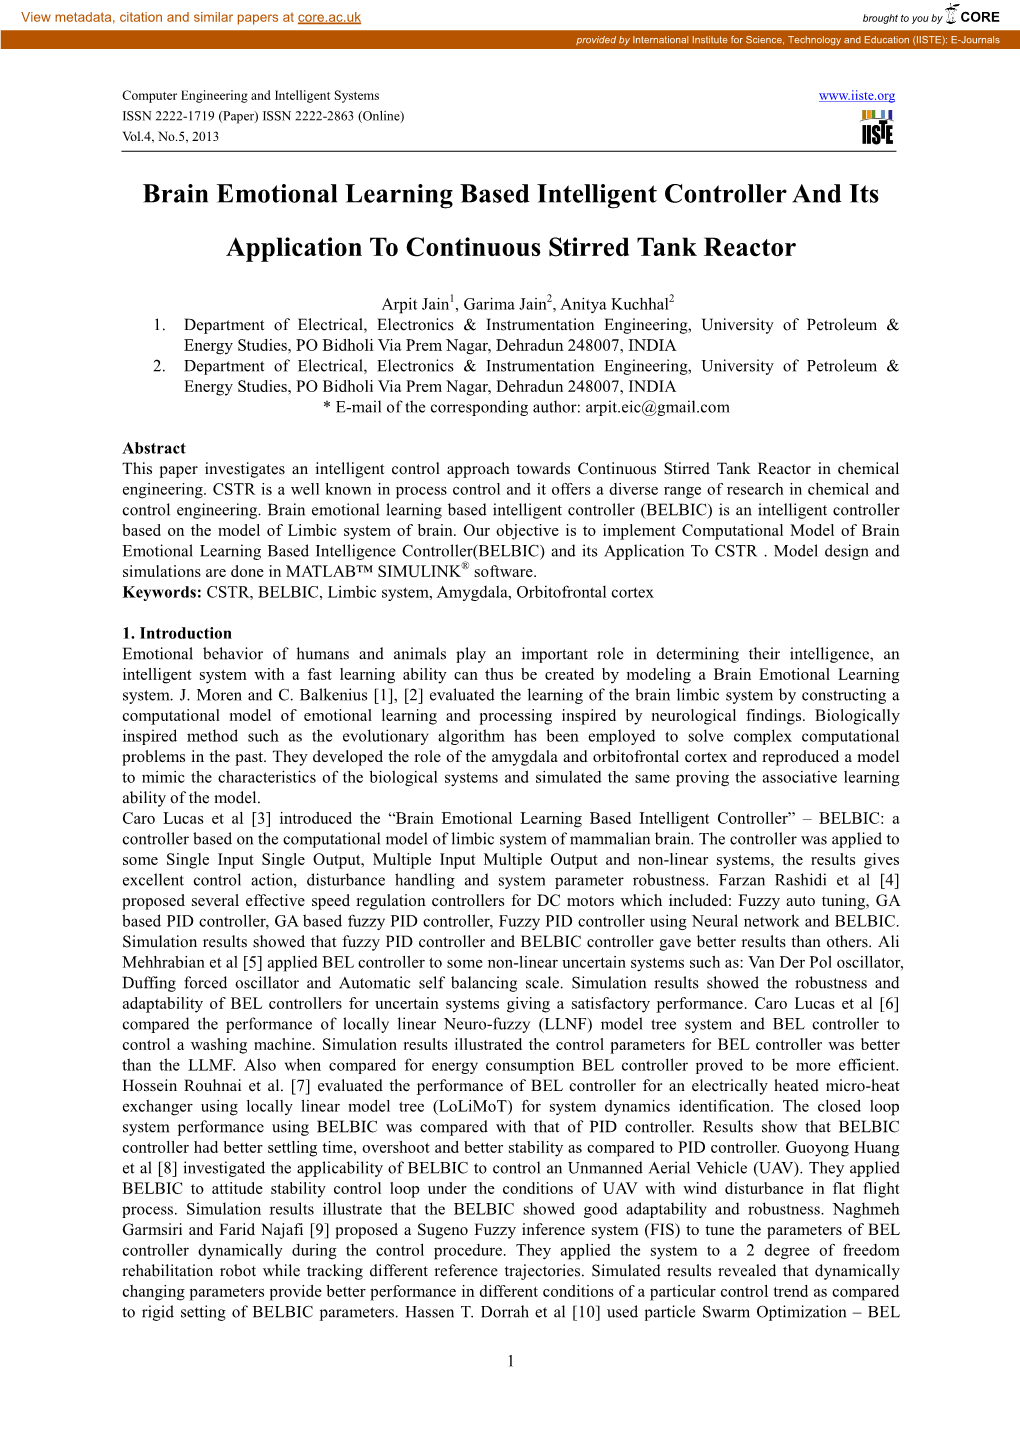 Brain Emotional Learning Based Intelligent Controller and Its Application to Continuous Stirred Tank Reactor